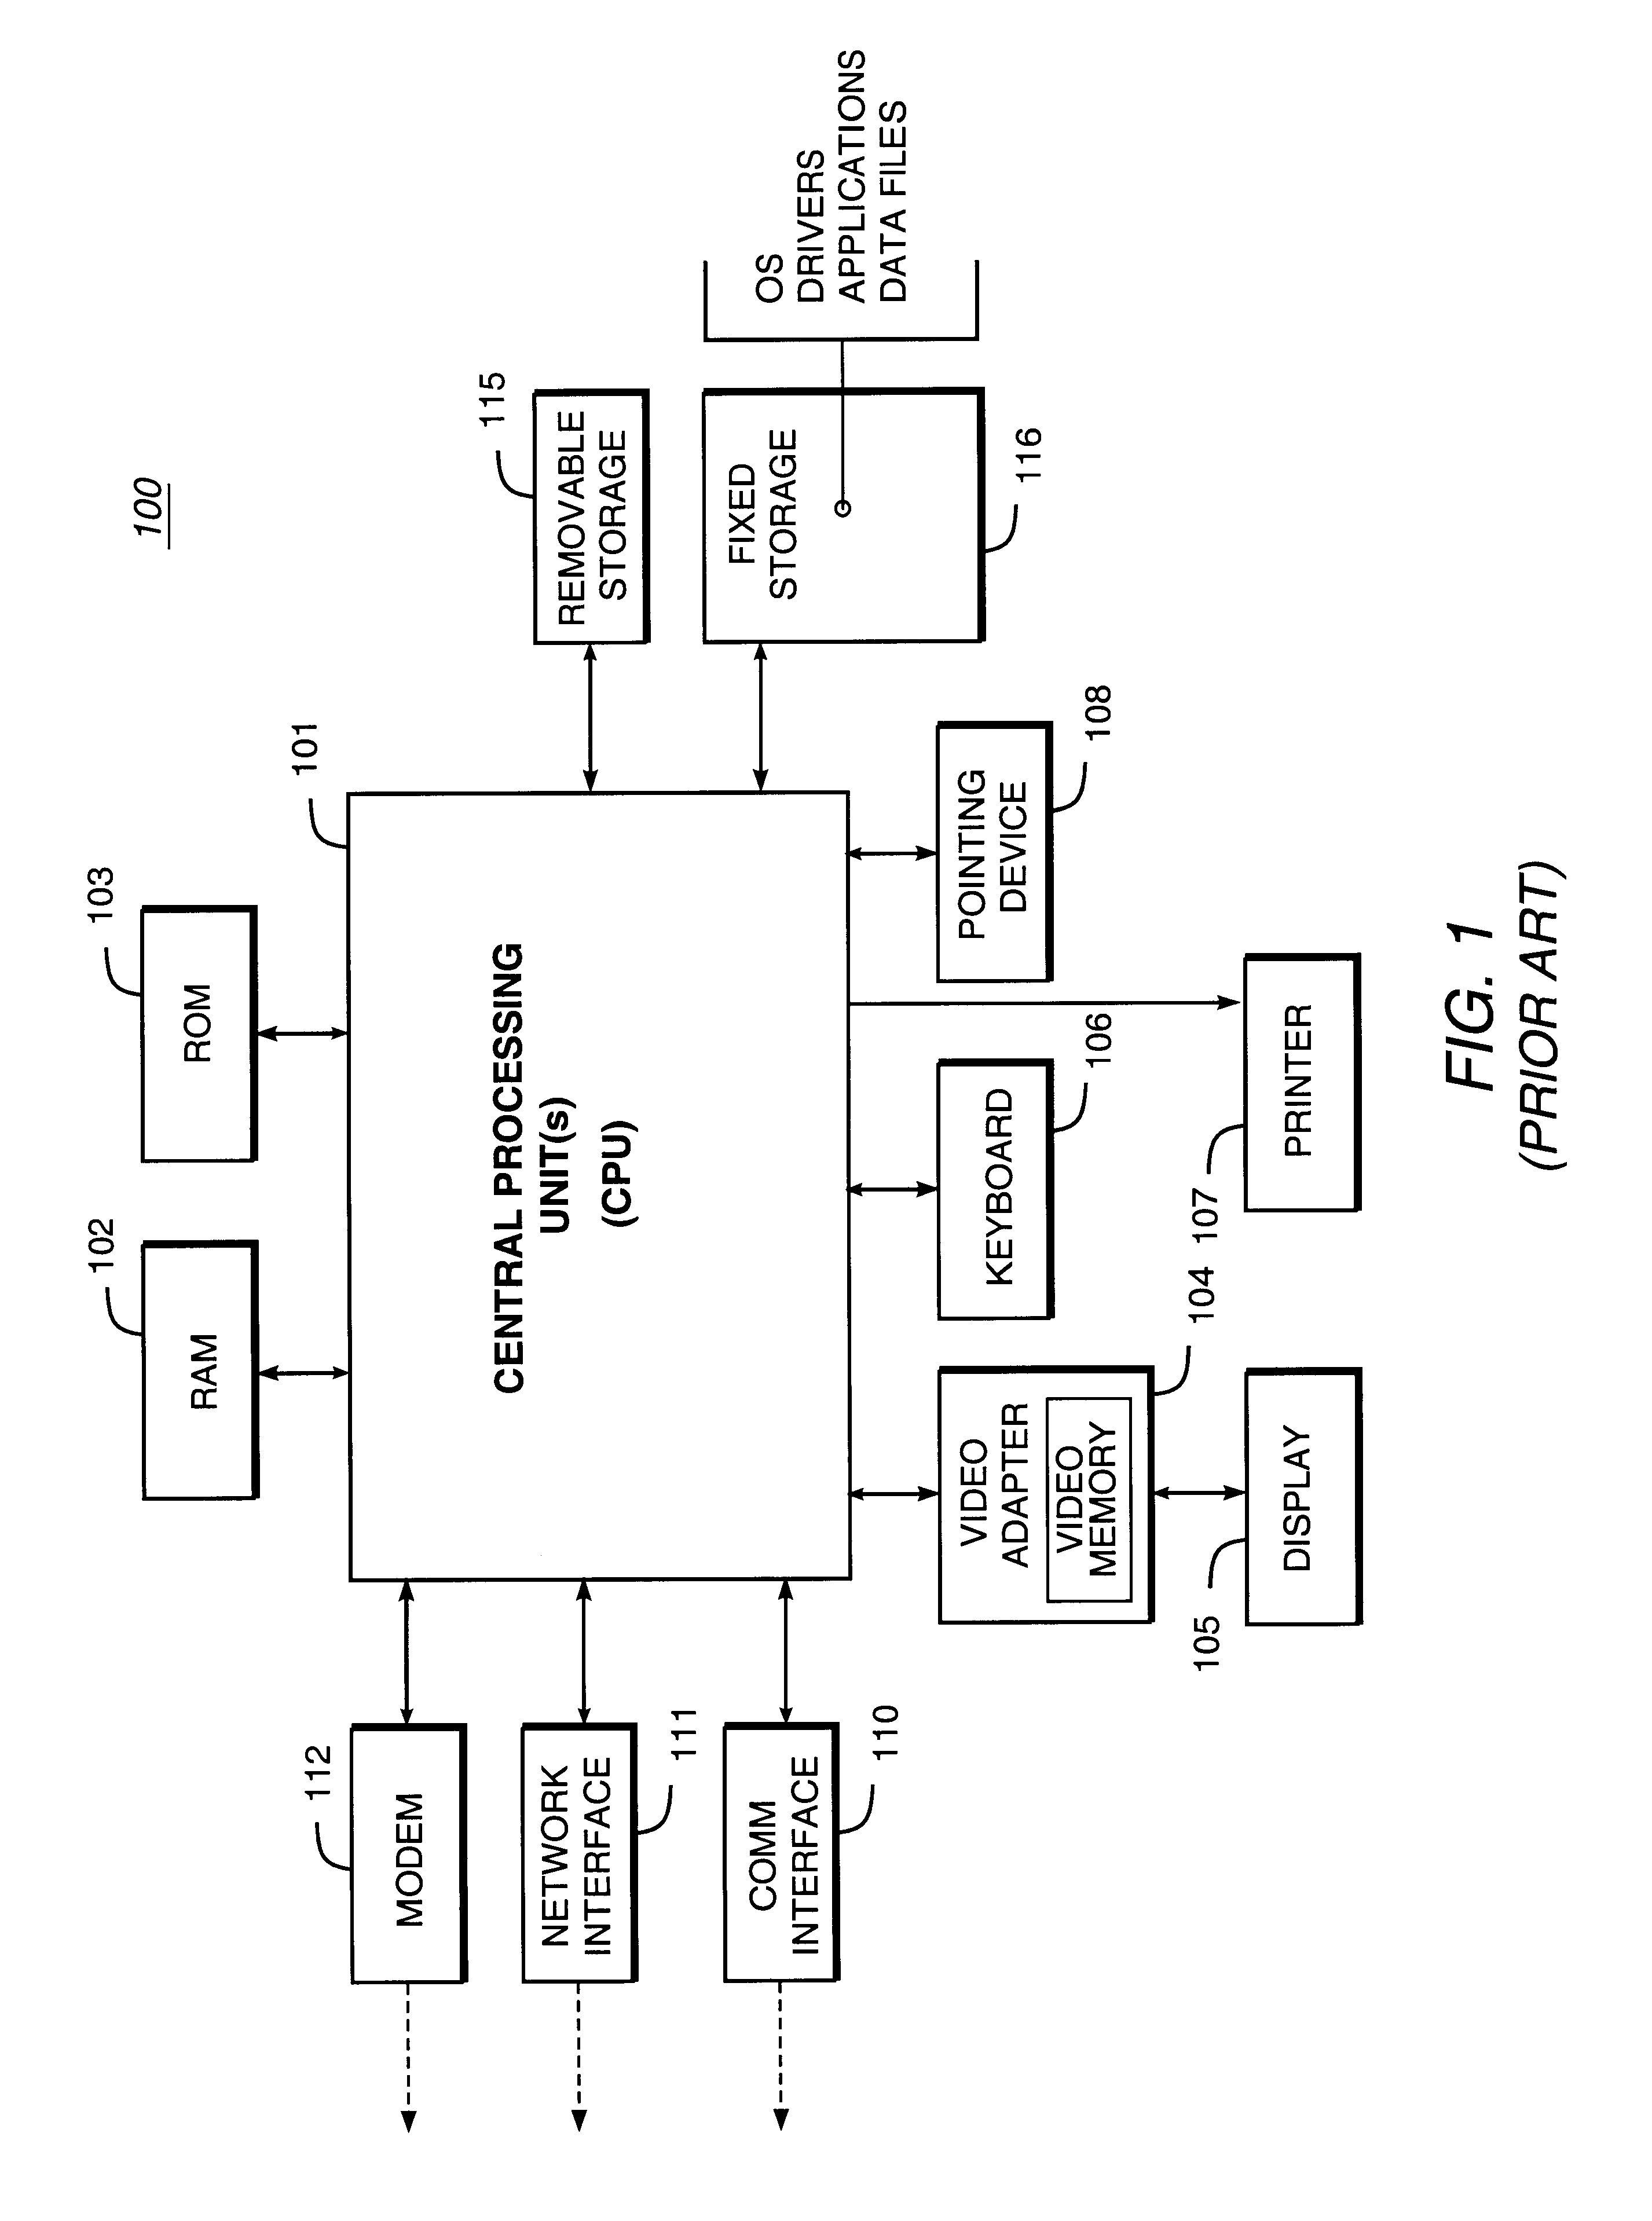 System and methodology providing compiler-assisted refactoring